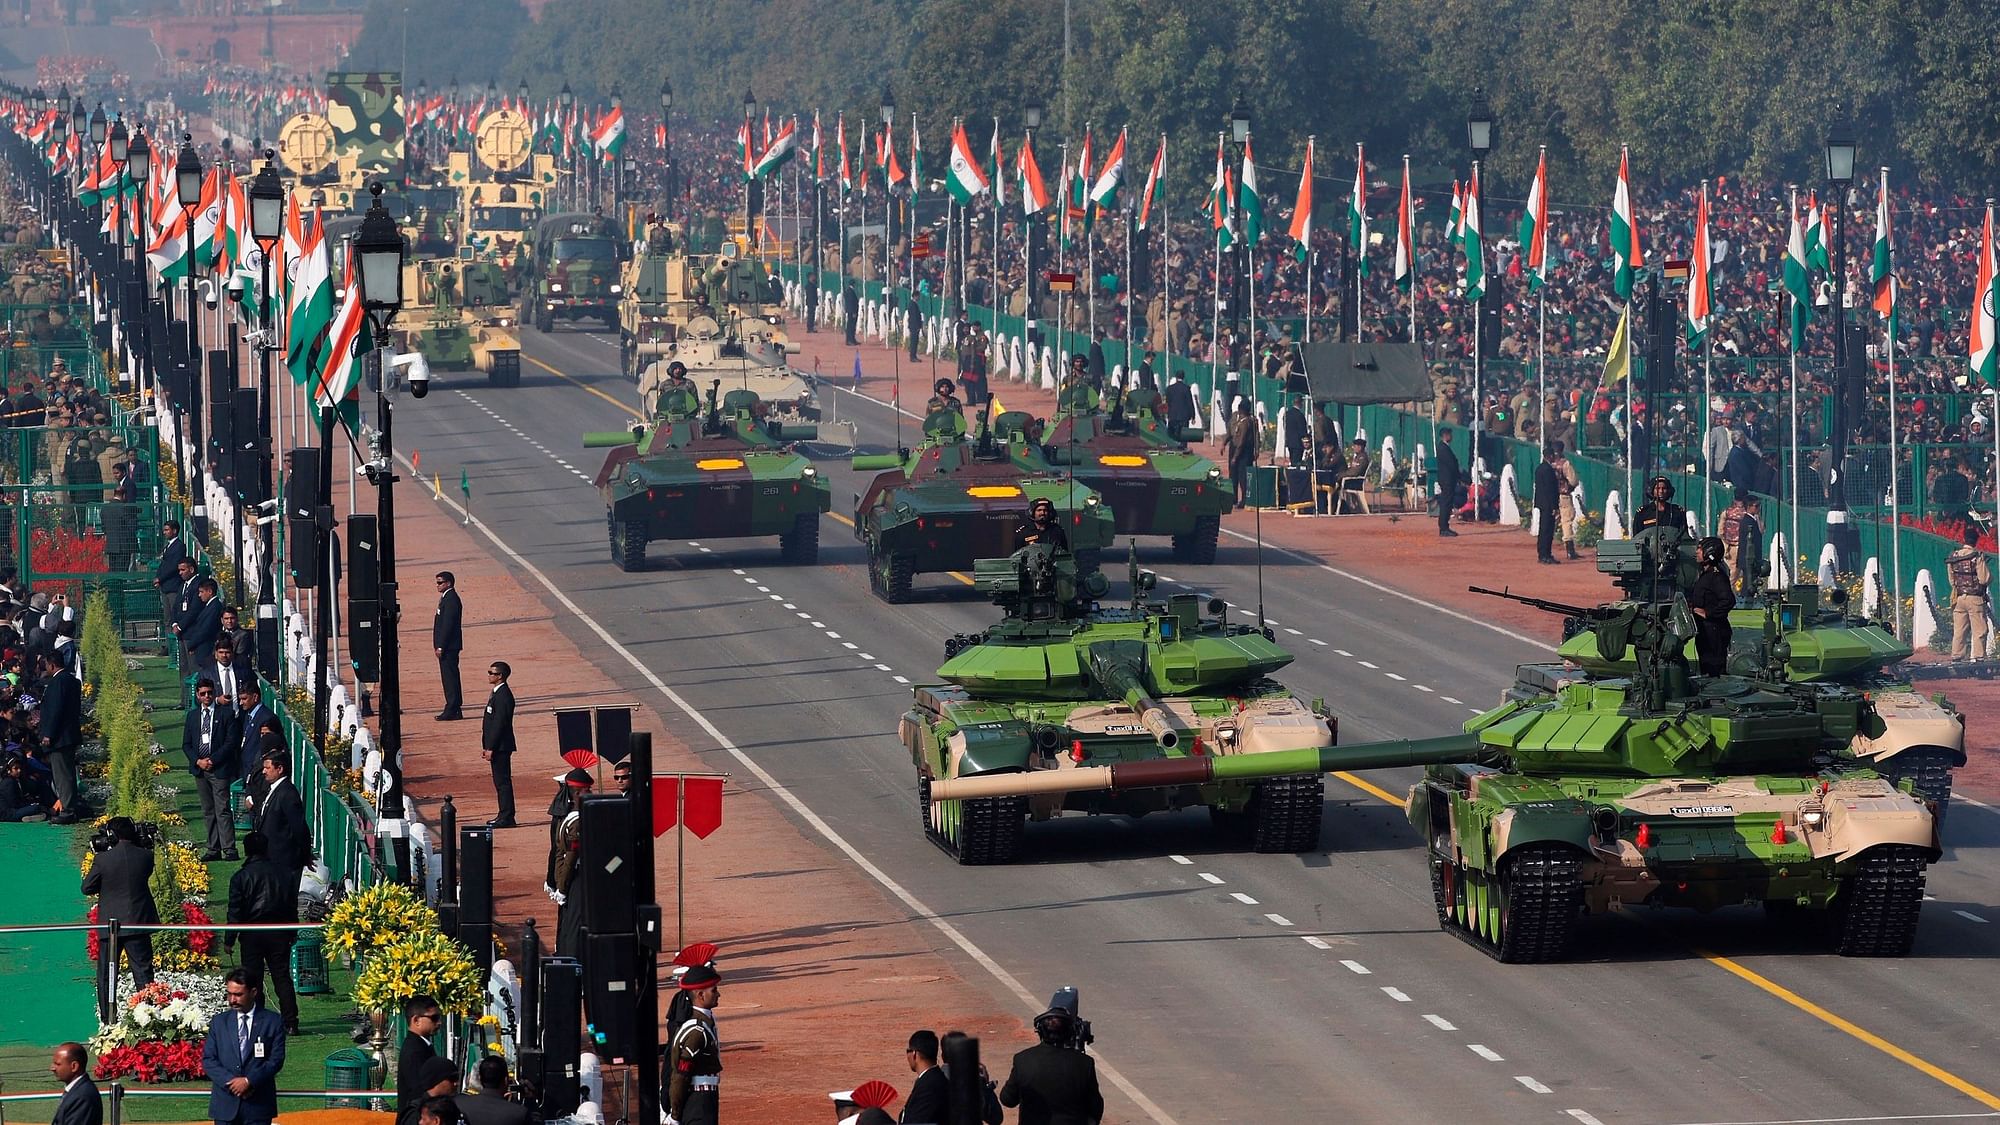 Catch all the live updates from India’s Republic Day celebrations here.